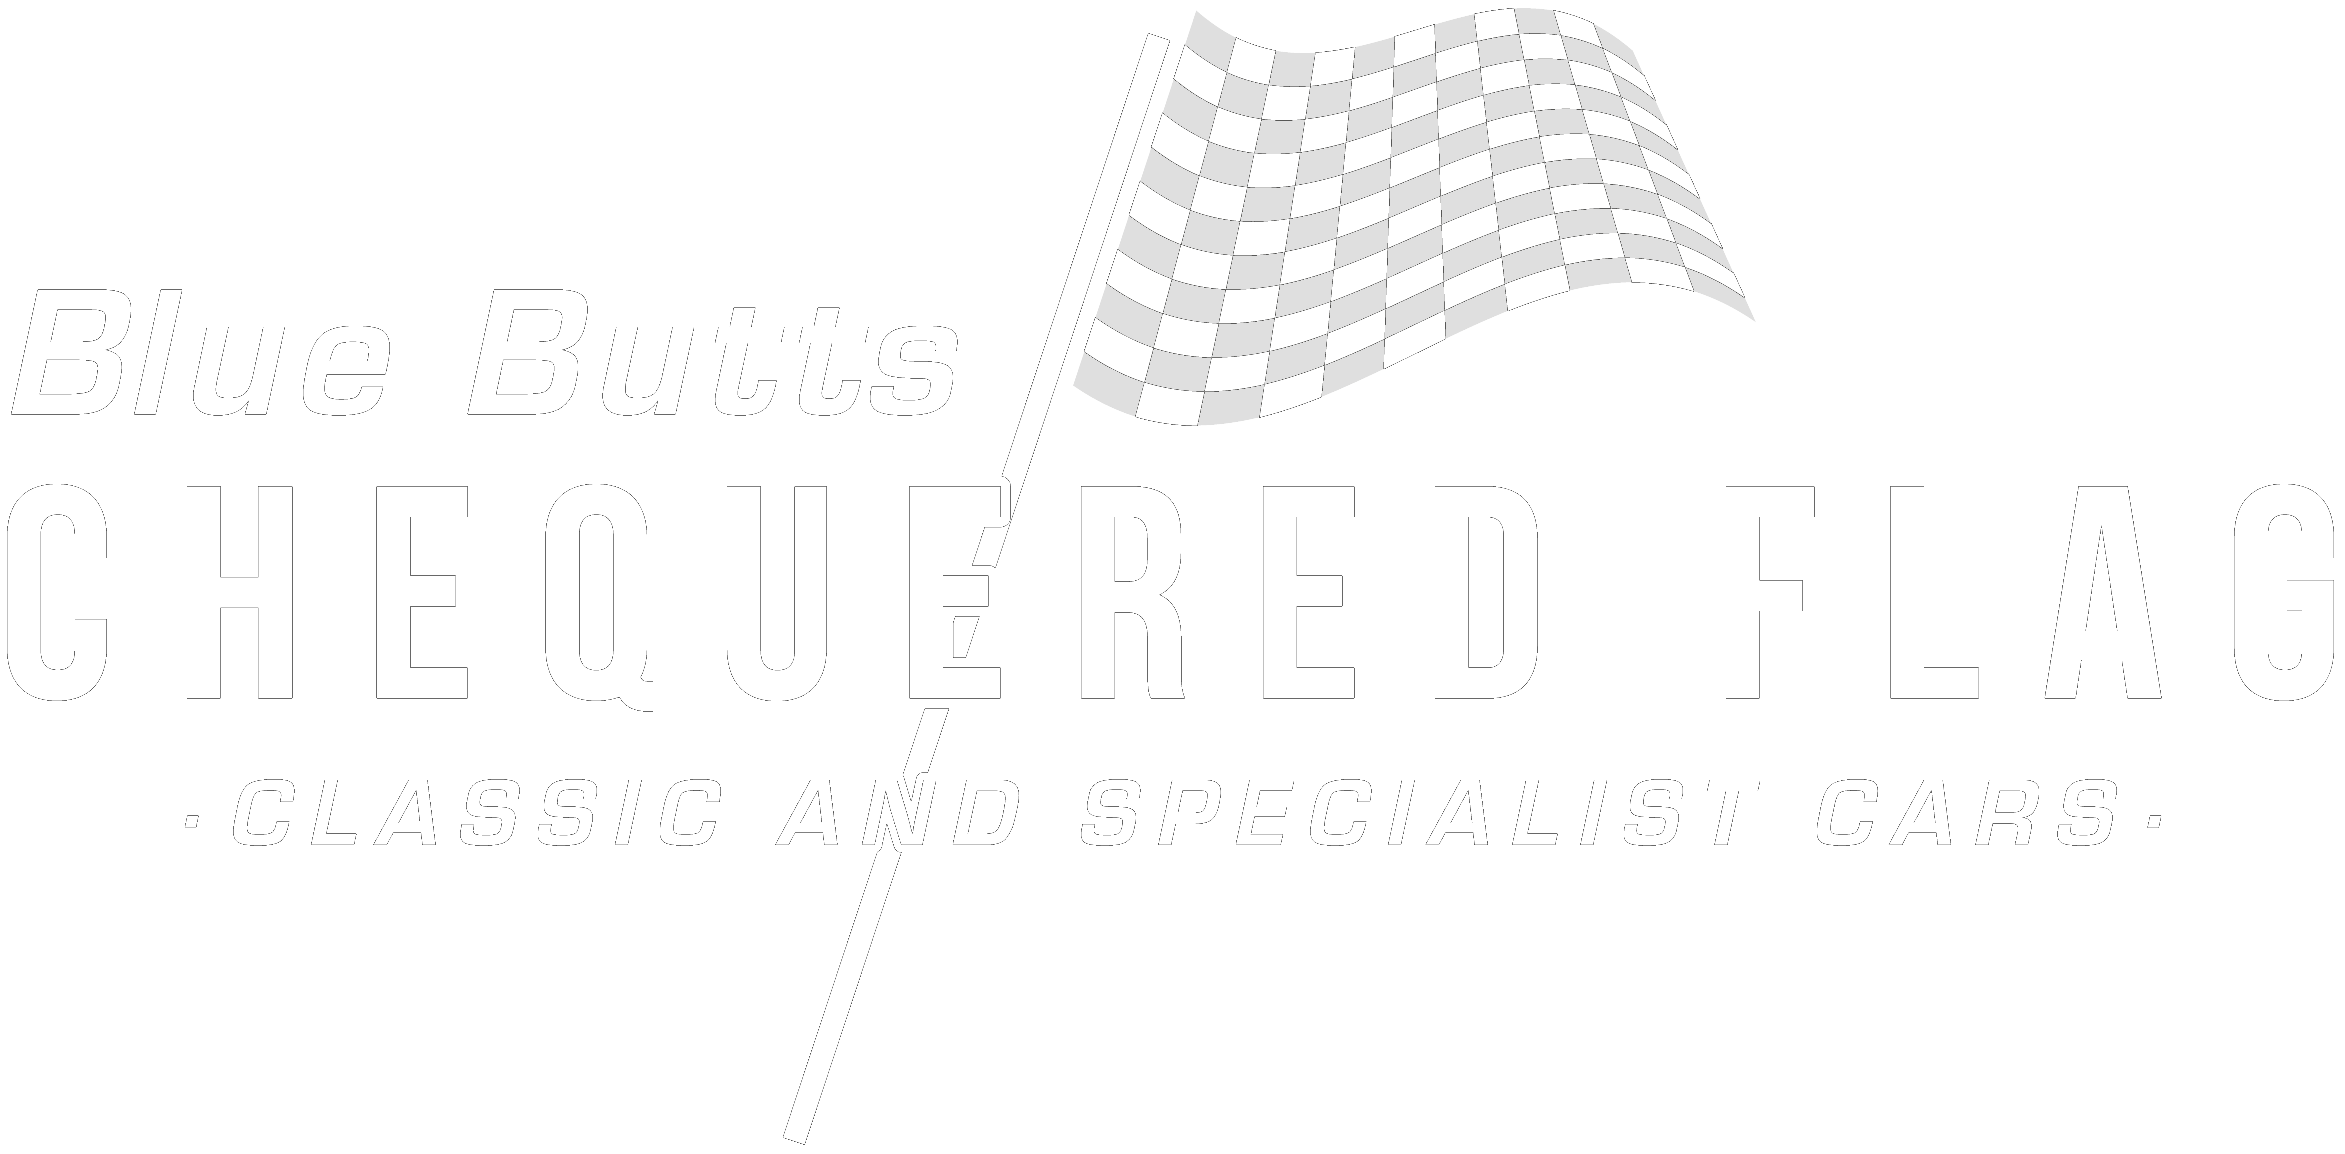 Blue Butts Chequered Flag logo